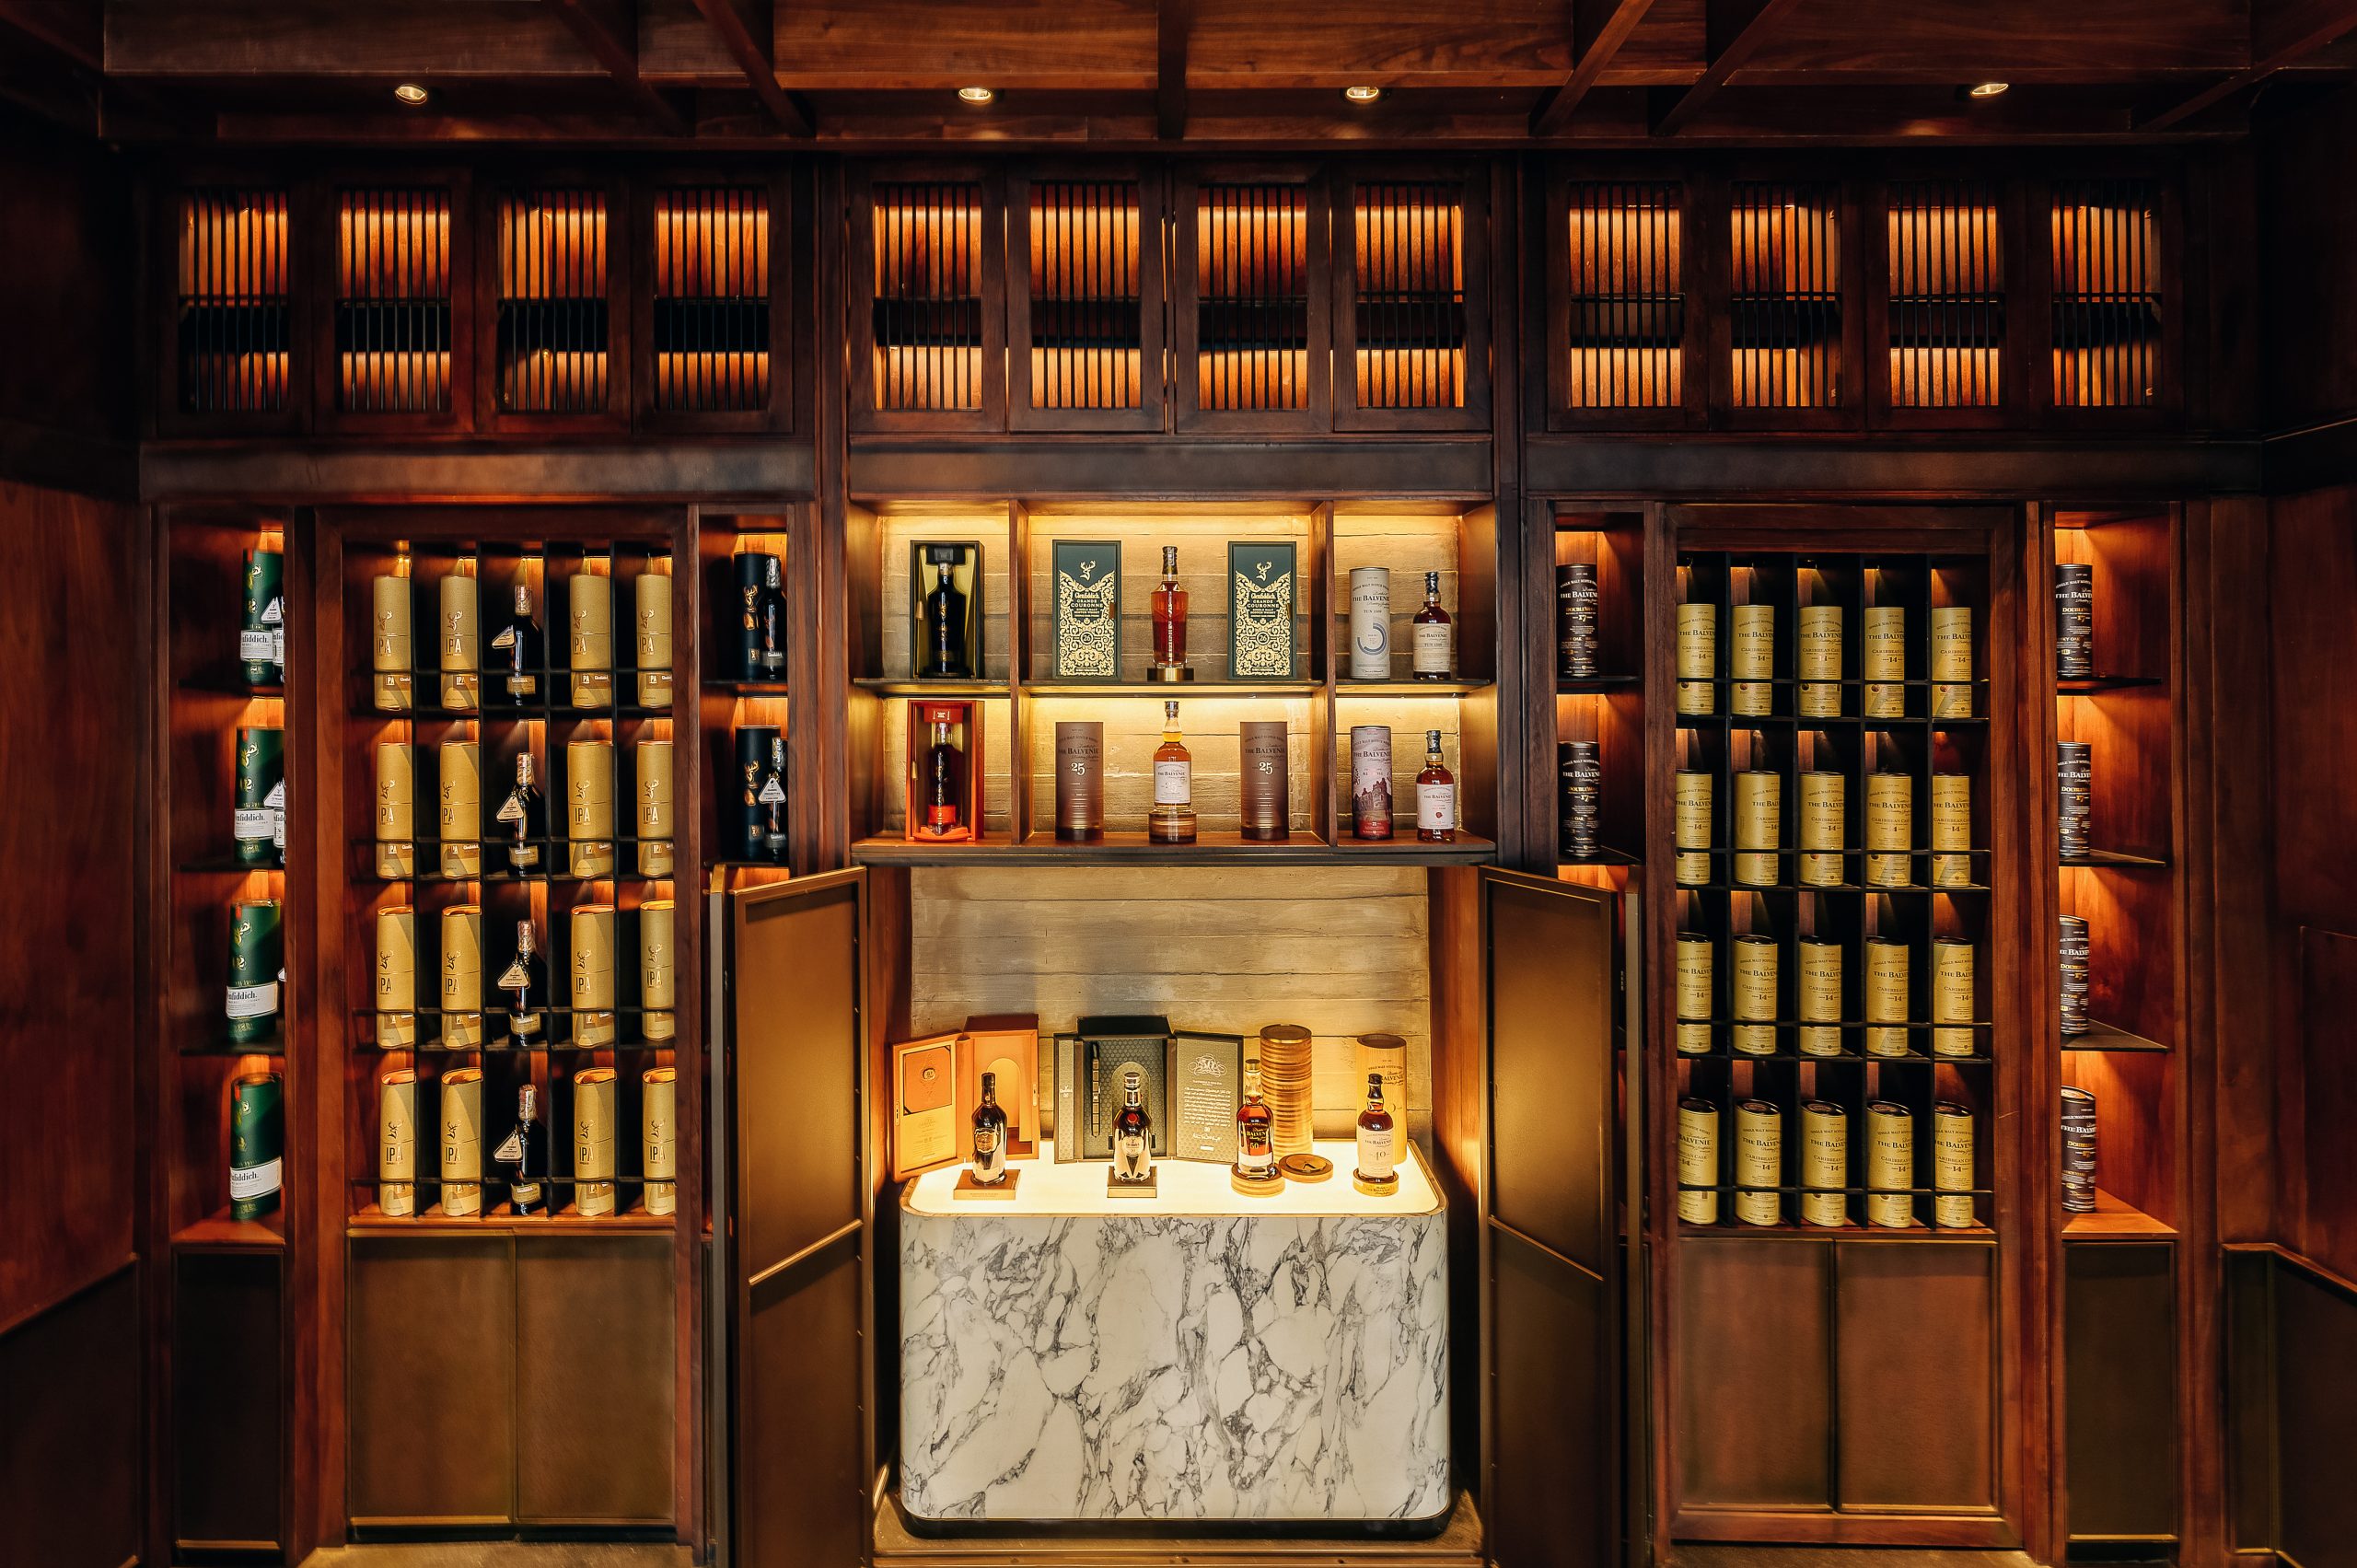 WILLIAM GRANT & SONS CHOOSES HO CHI MINH CITY, VIETNAM AS SECOND LOCATION FOR THE DISTILLERS LIBRARY